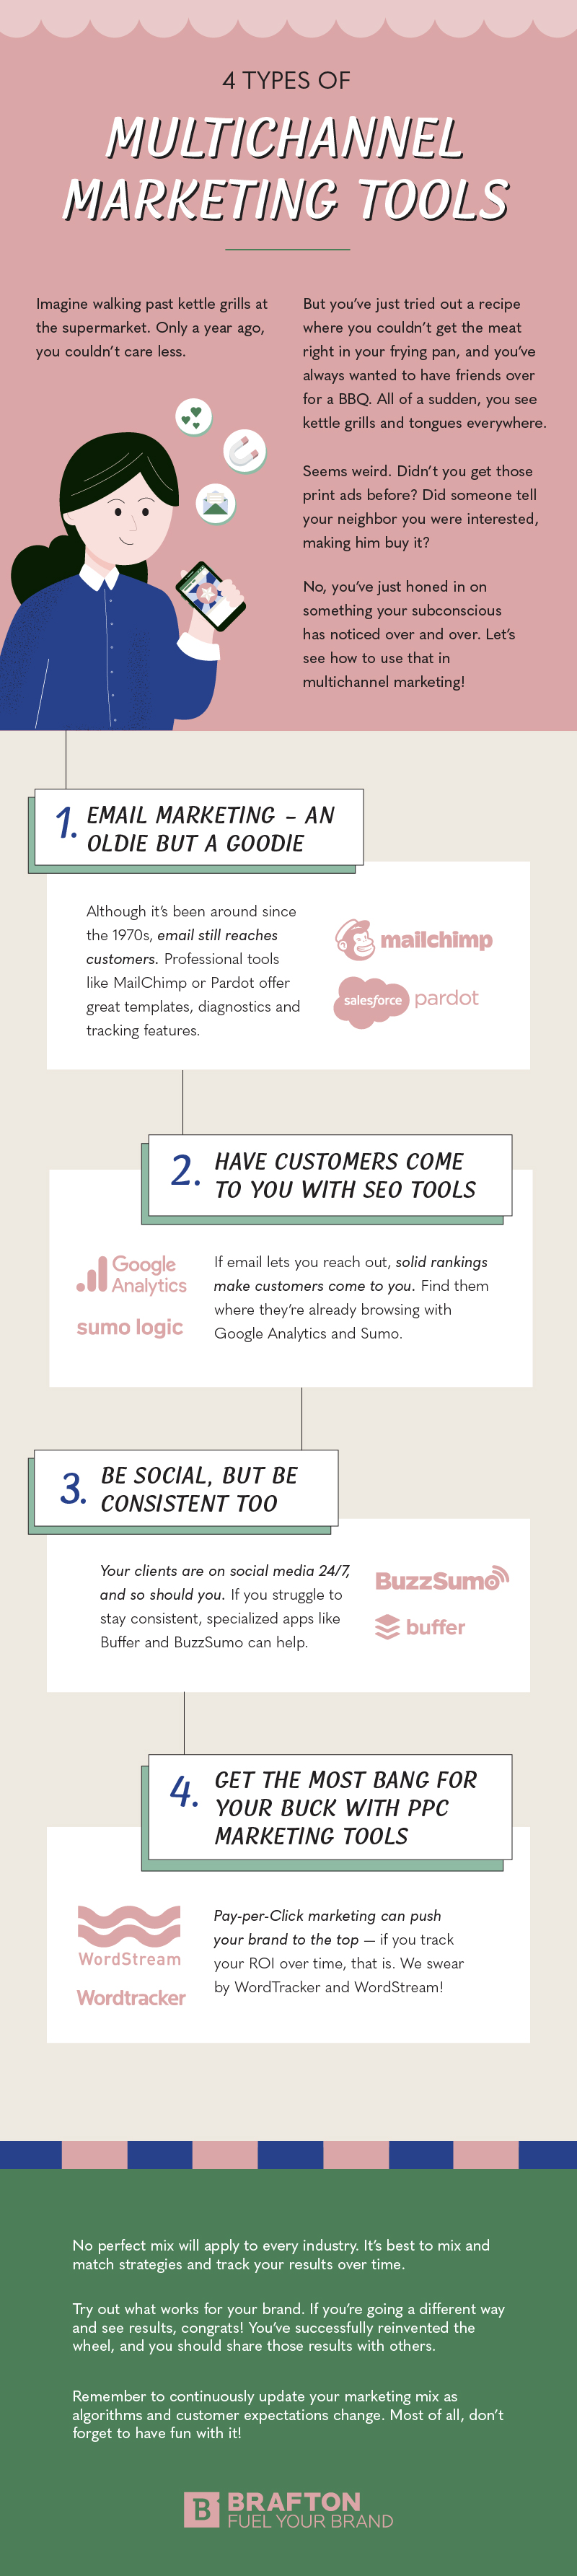 Multichannel Marketing Tools Infographic